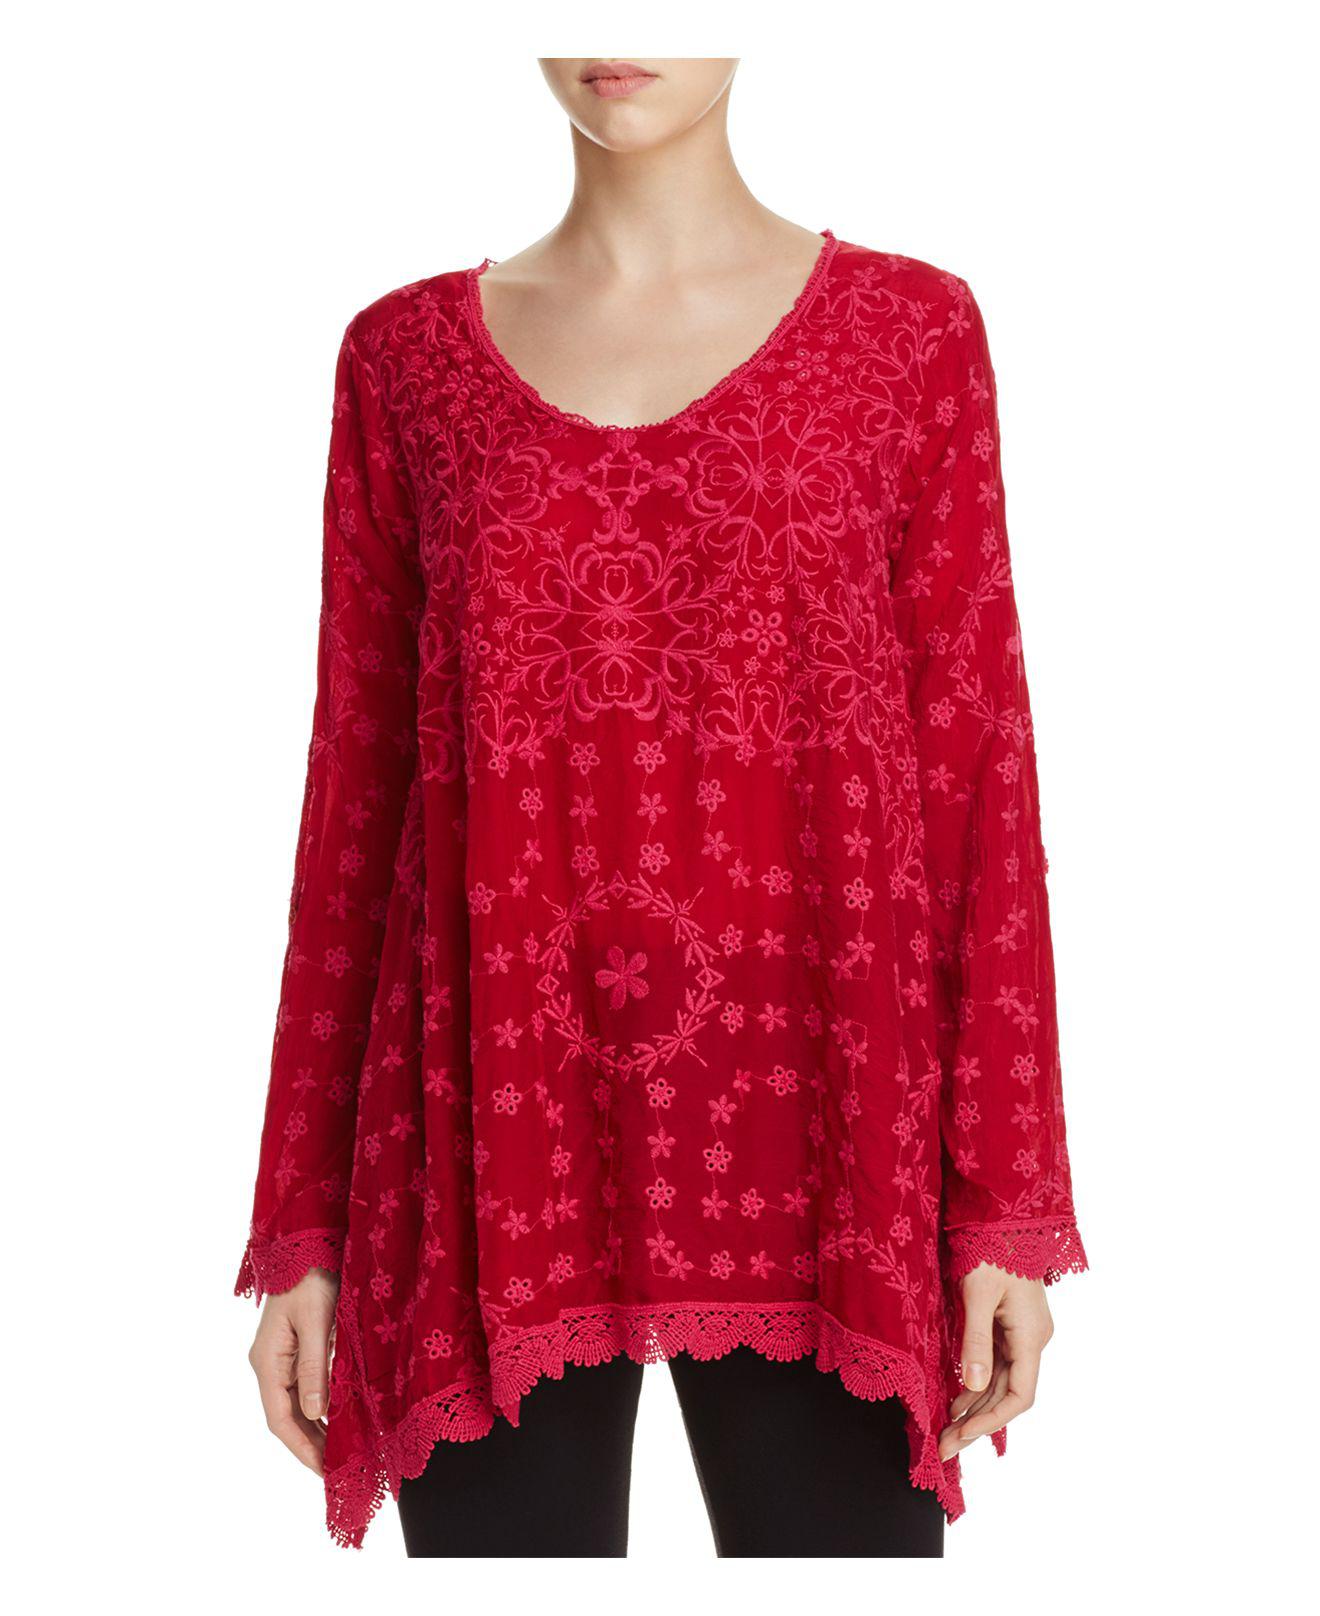 Lyst - Johnny Was Jossimar Embroidered Eyelet Tunic in Red